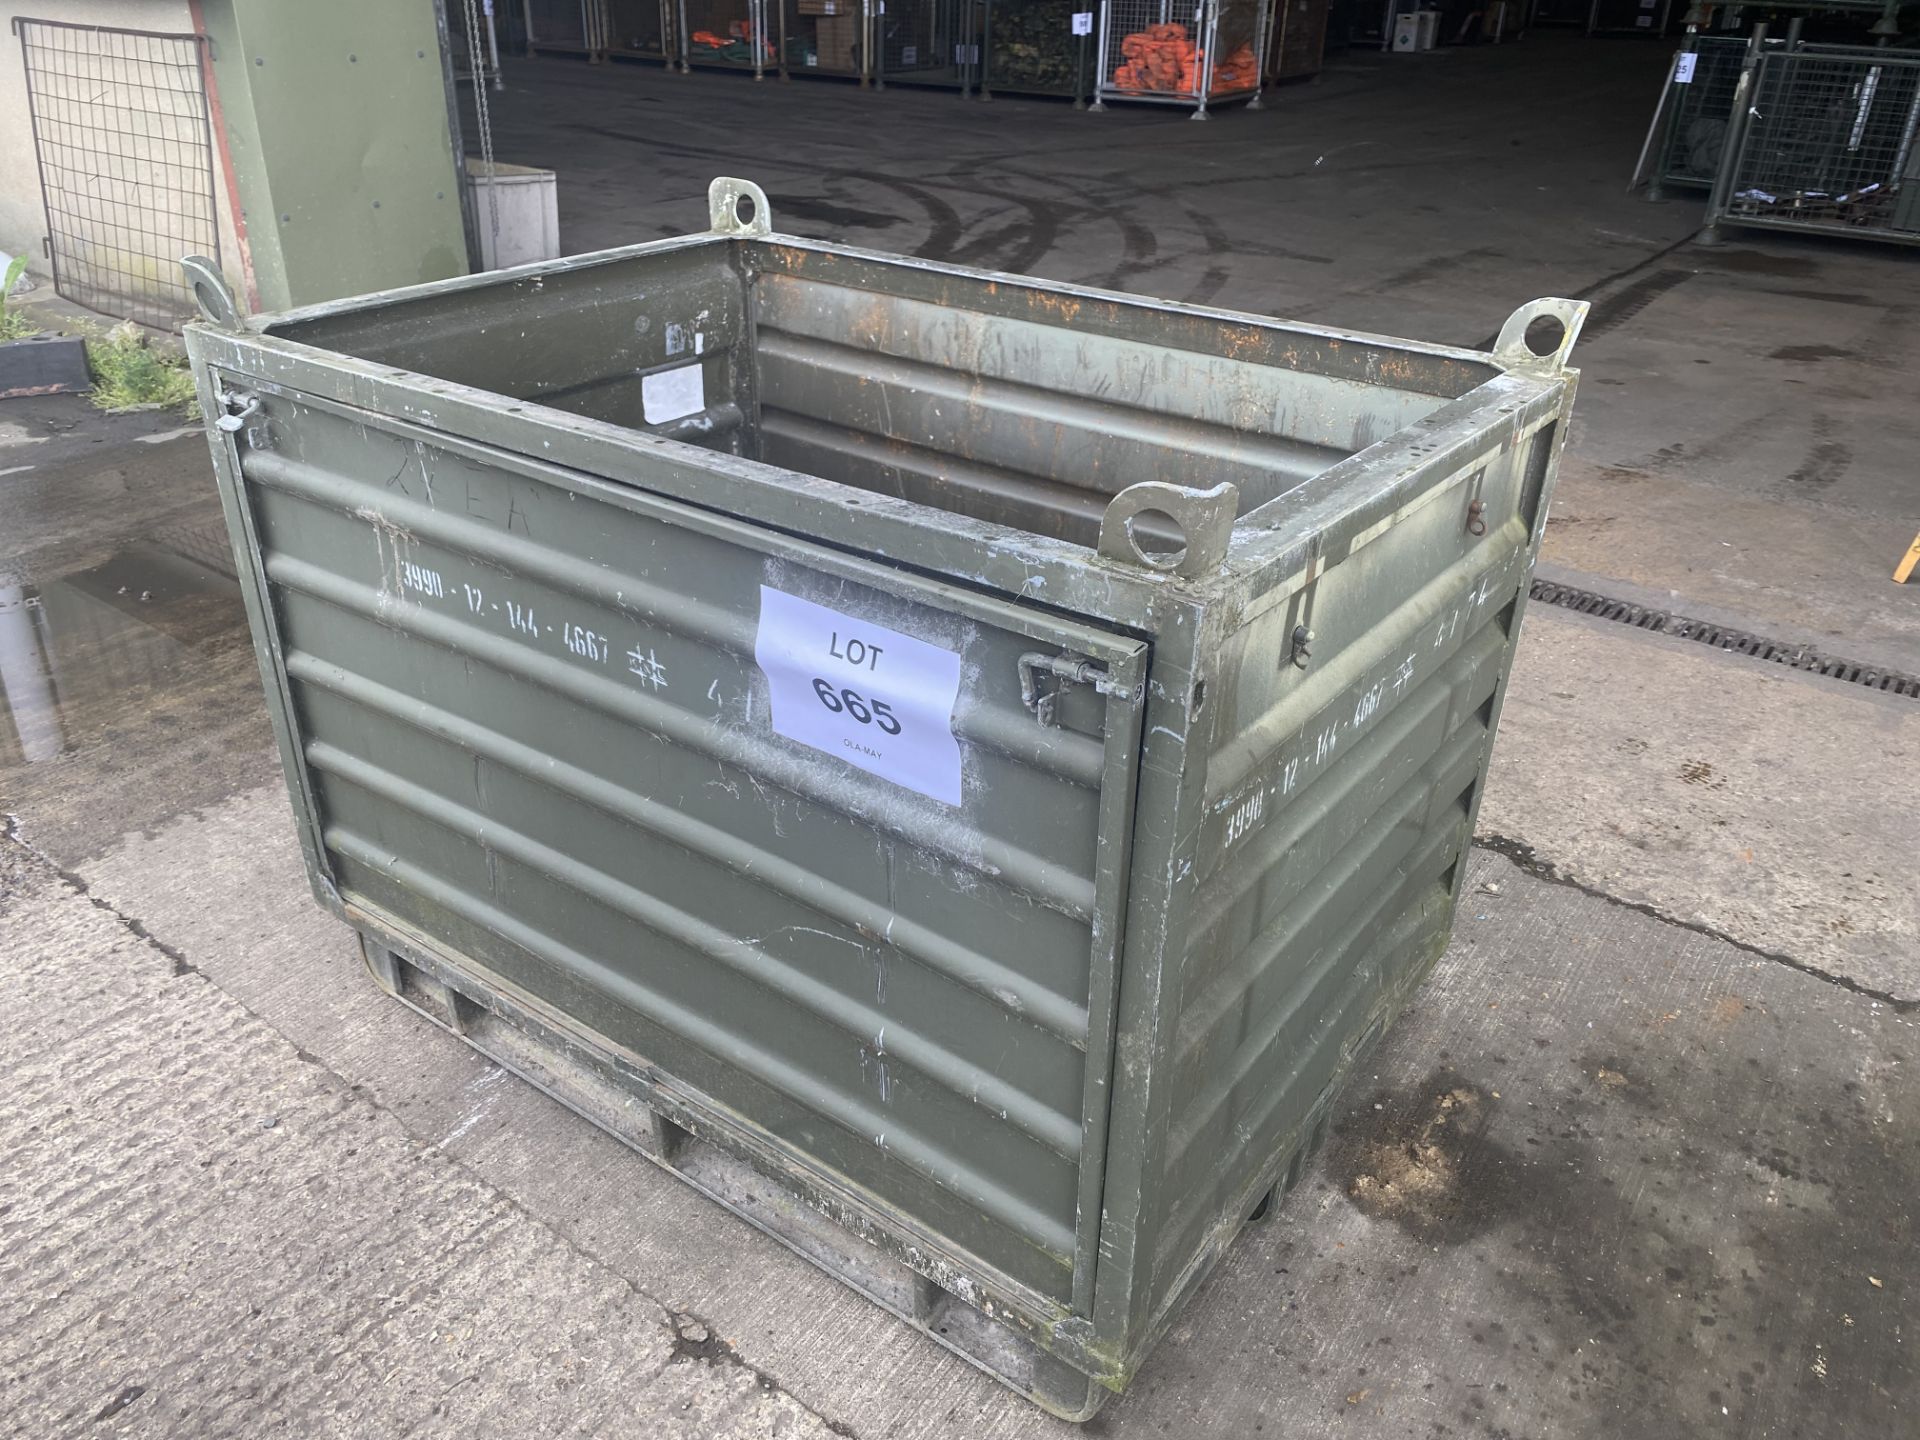 1 x Metal Storage / Transport Crate with Fold down side, Size 130 x 90 x 90 cm - Image 6 of 6